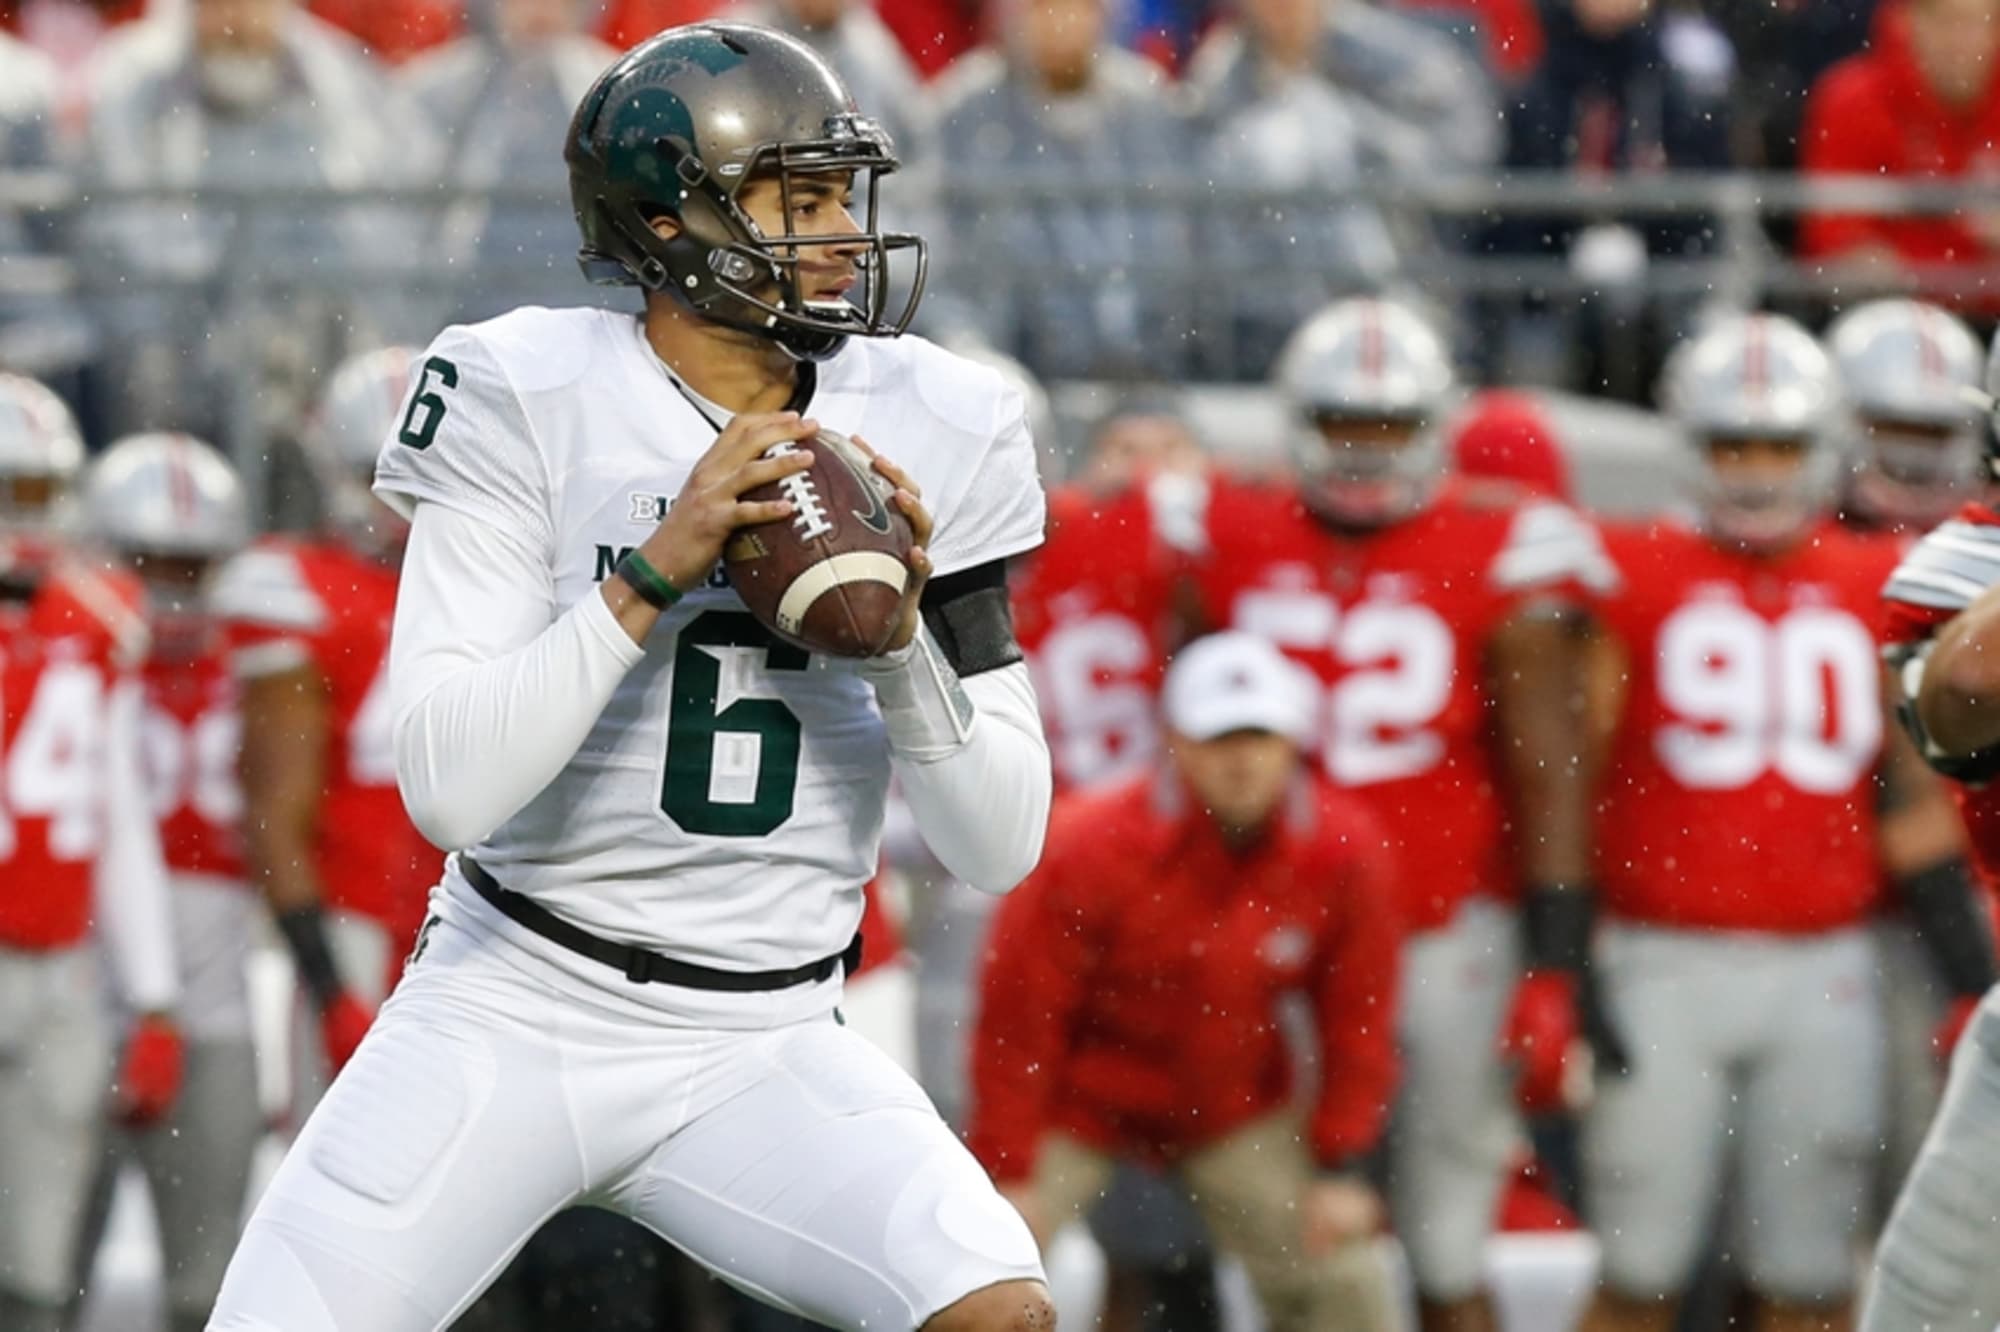 Michigan State Football: Damion Terry has no transfer plans